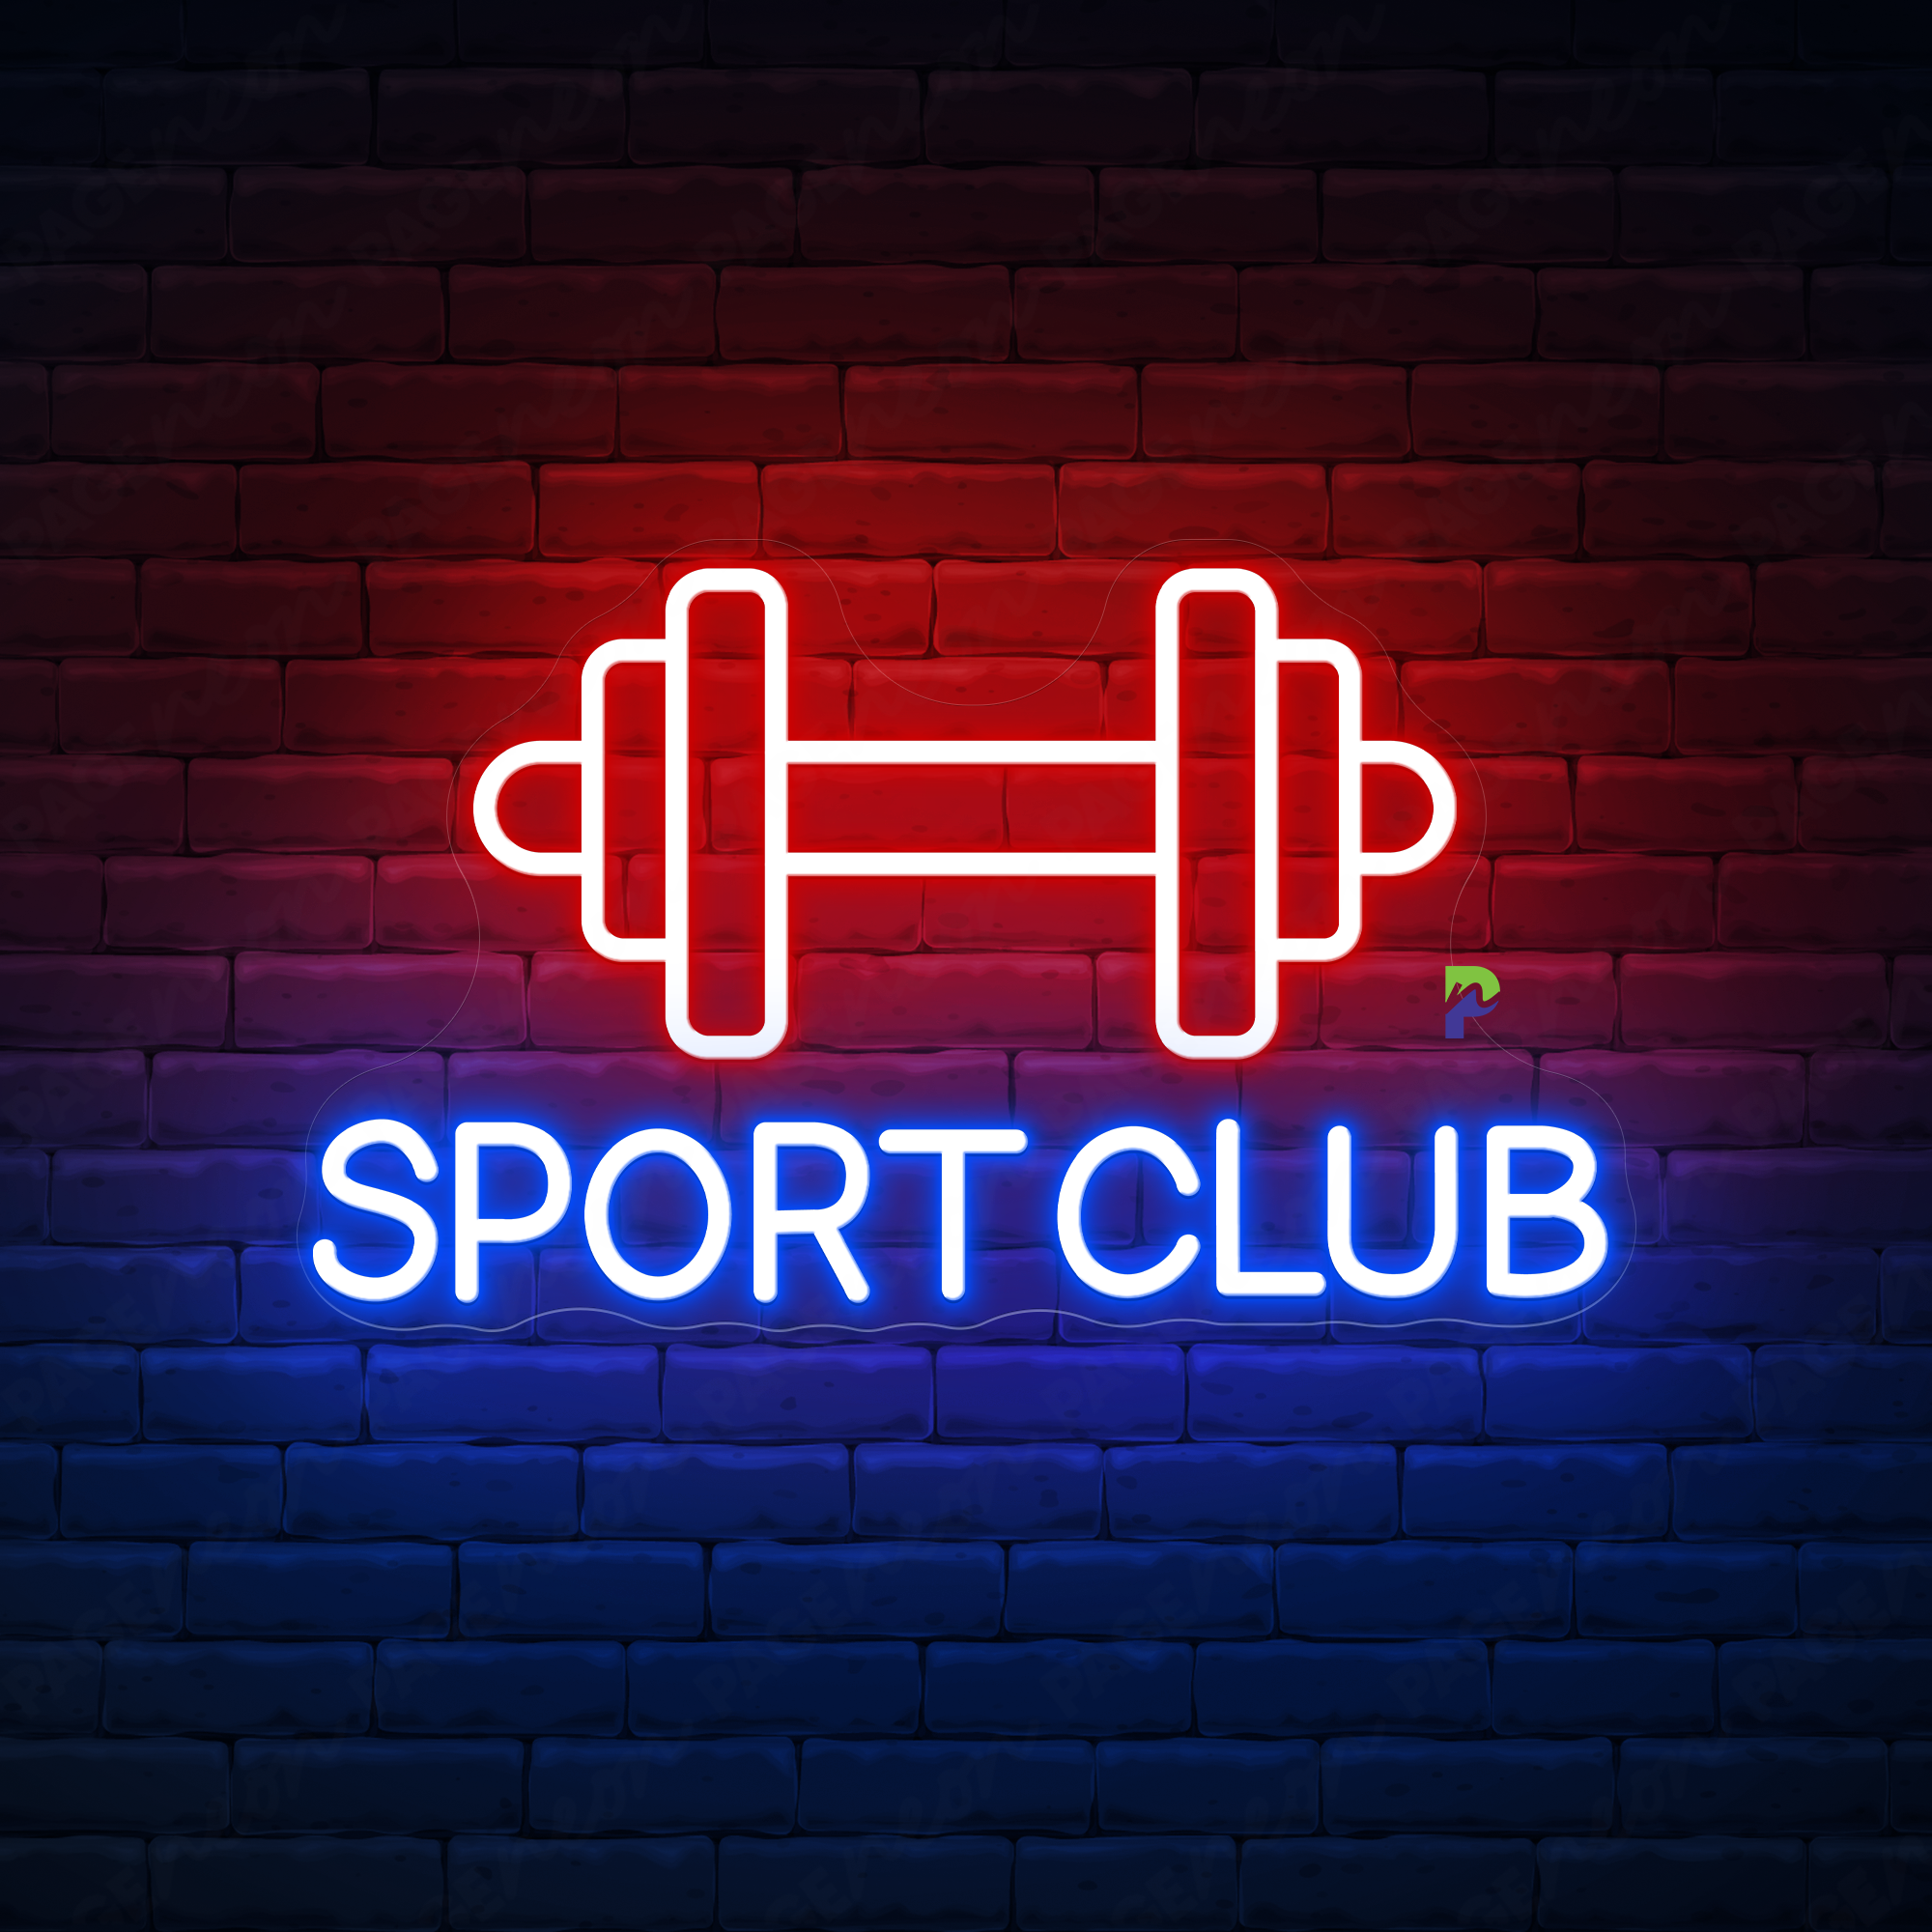 Sport Club Neon Sign Business Led Light